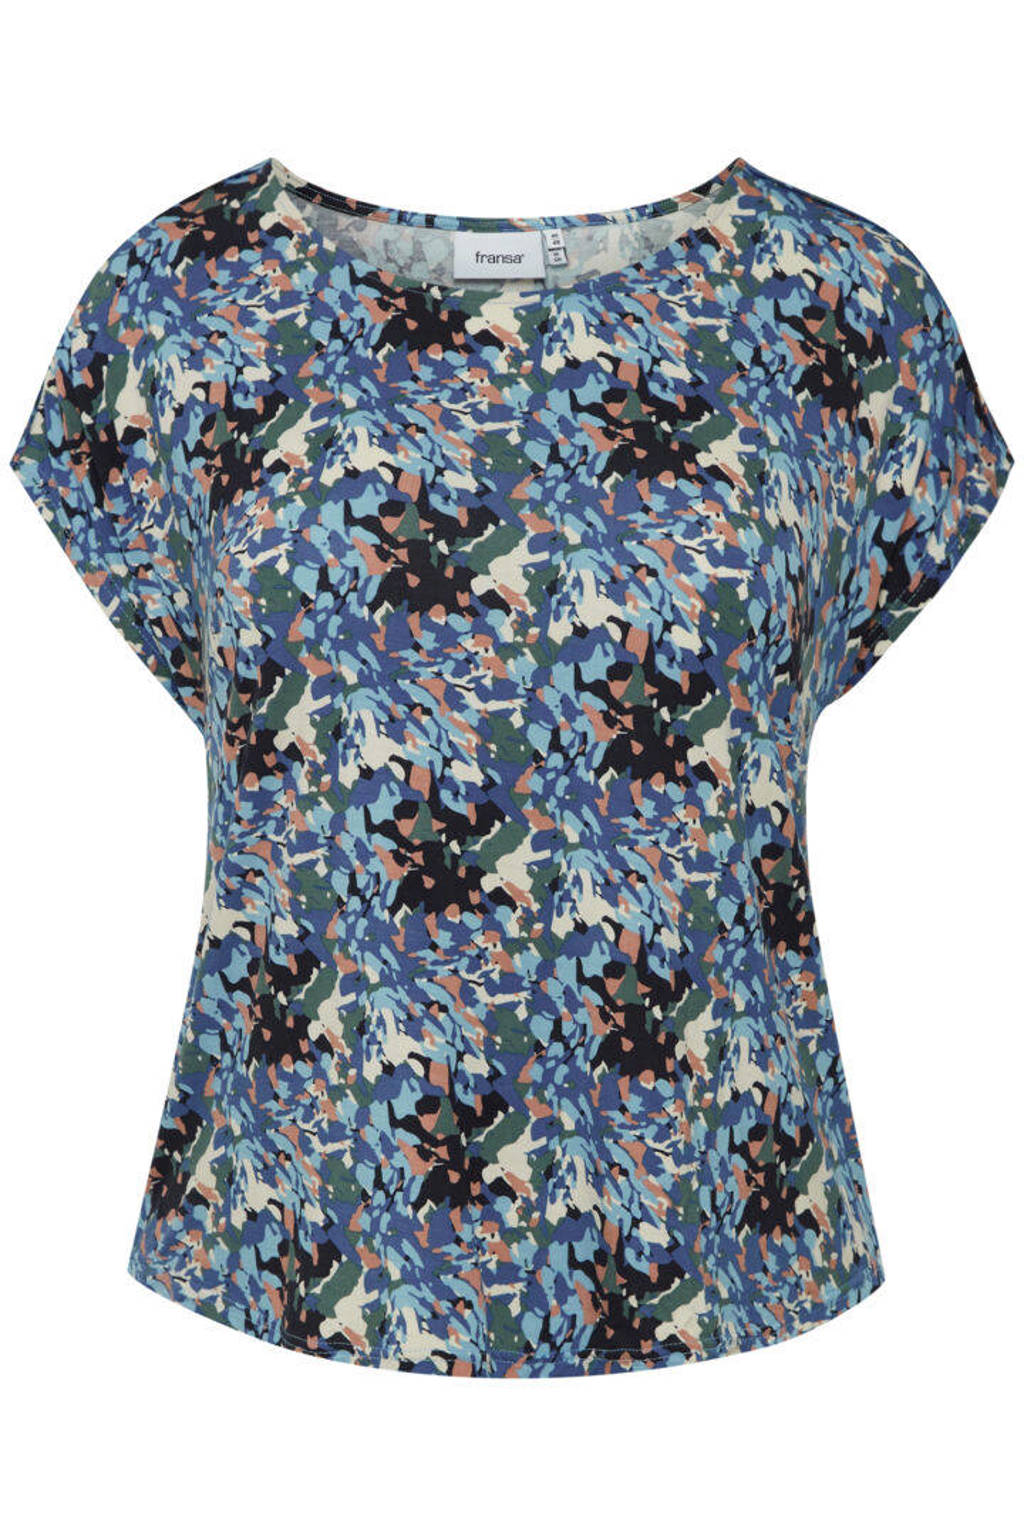 Fransa Plus Size Selection top met all over print blauw